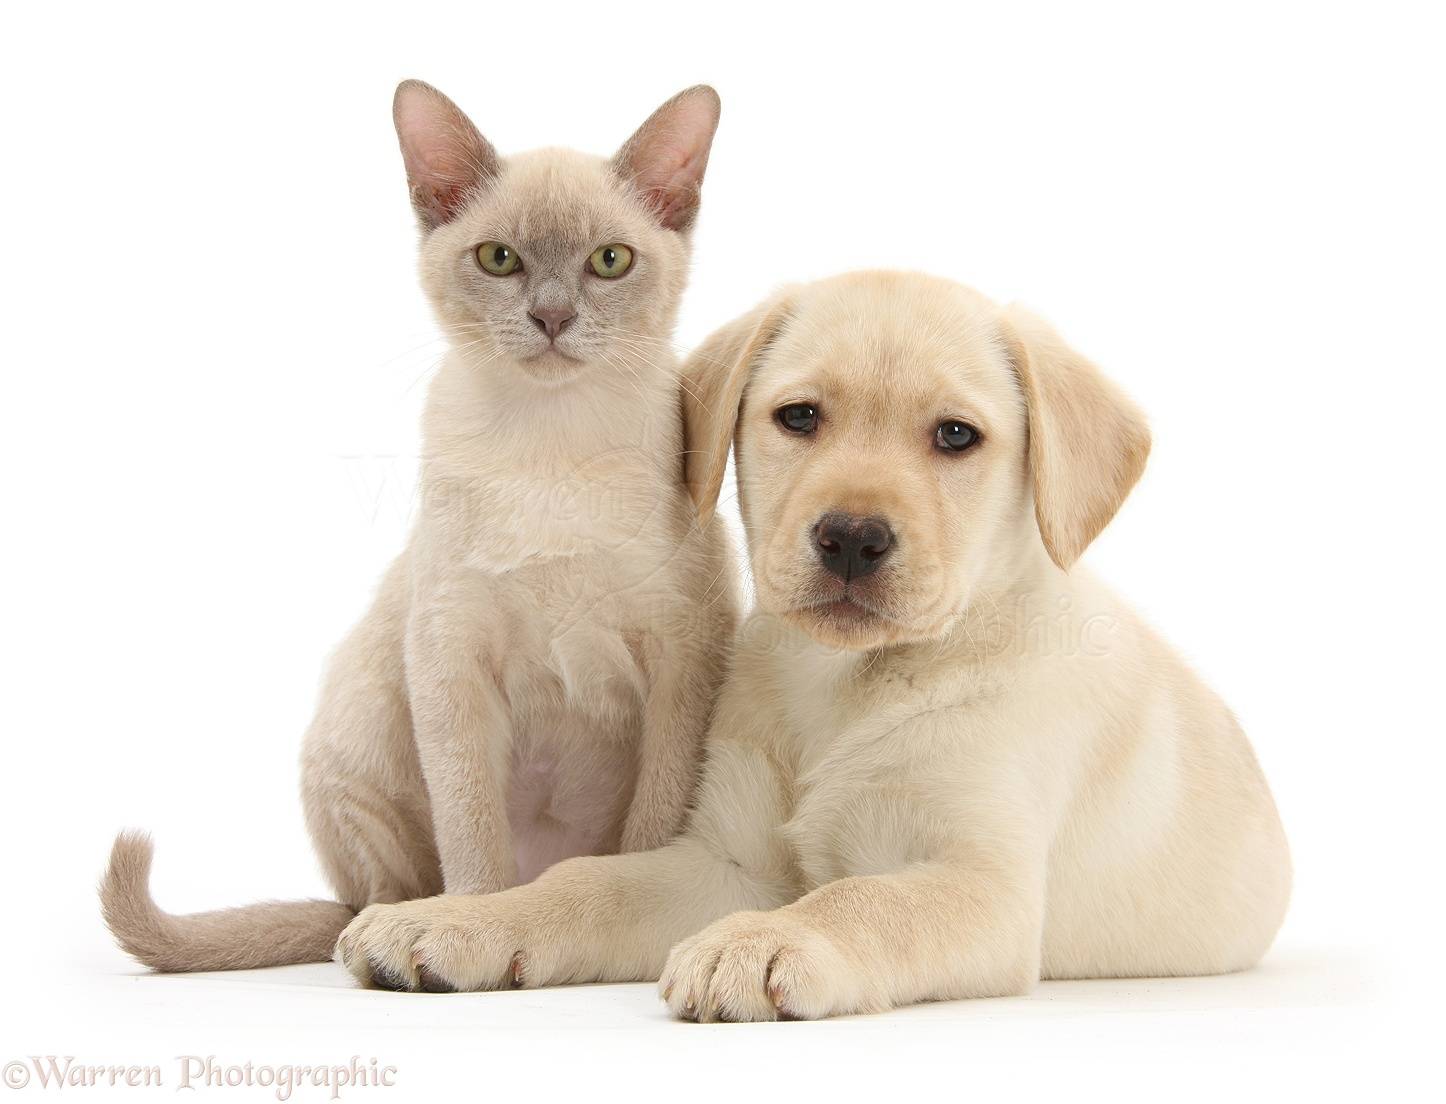 31014-Yellow-Labrador-Retriever-pup-and-young-Burmese-cat-white-background.jpg